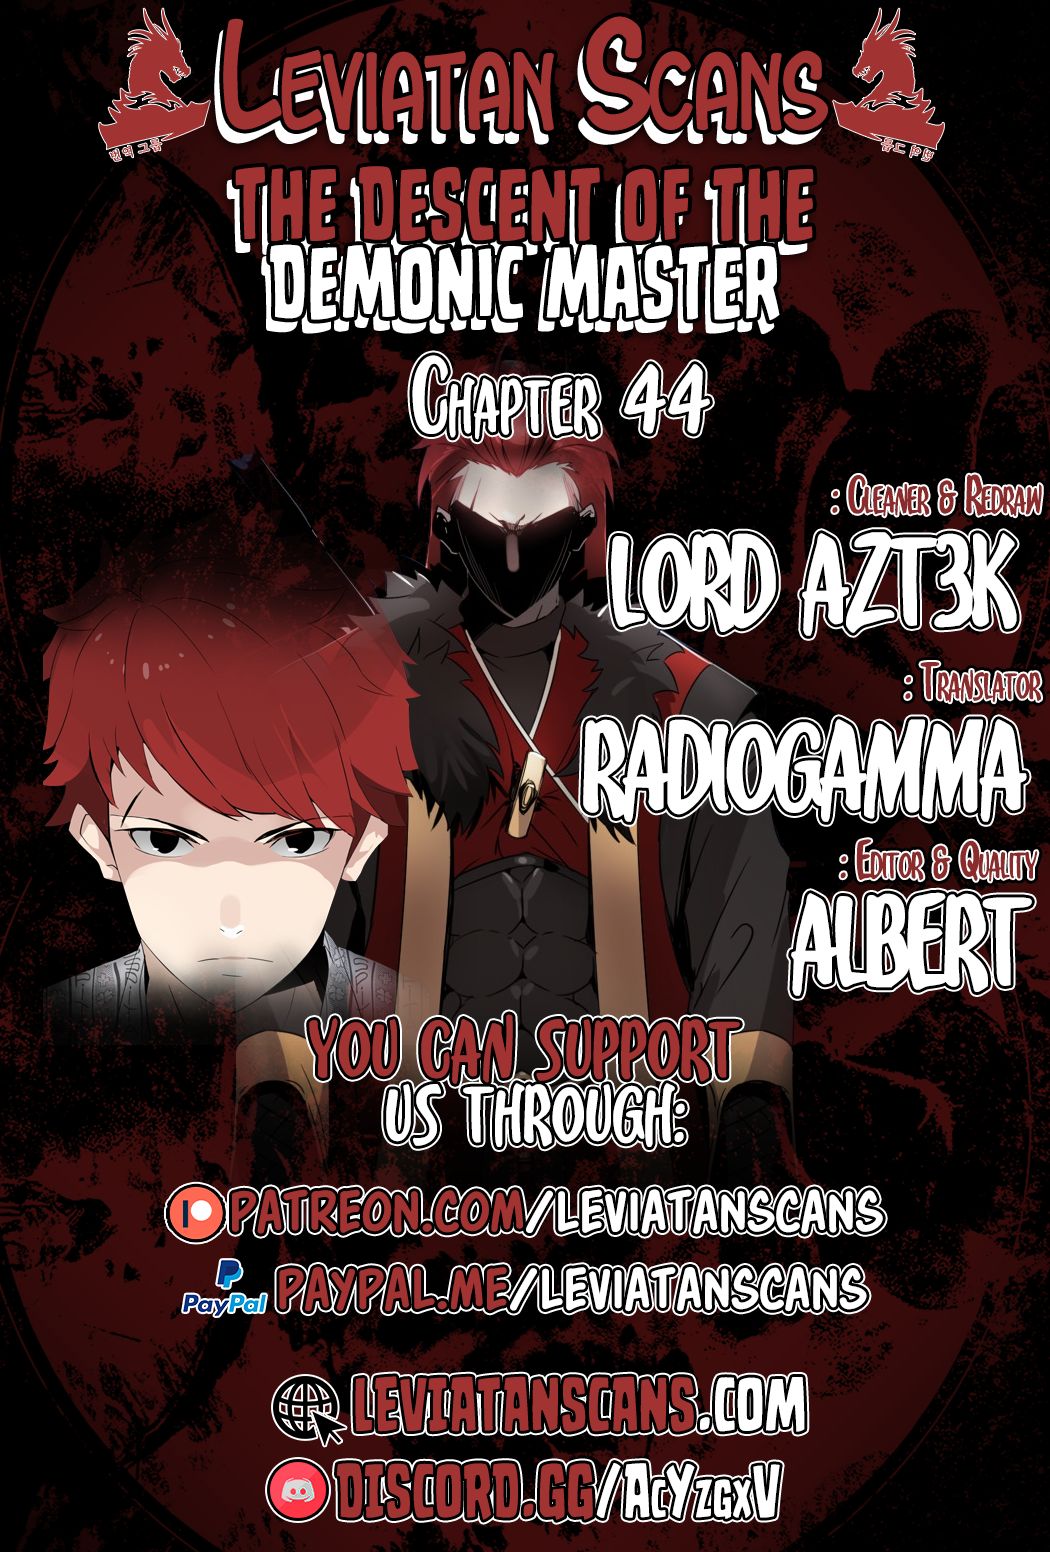 The Descent Of The Demonic Master Chapter 44